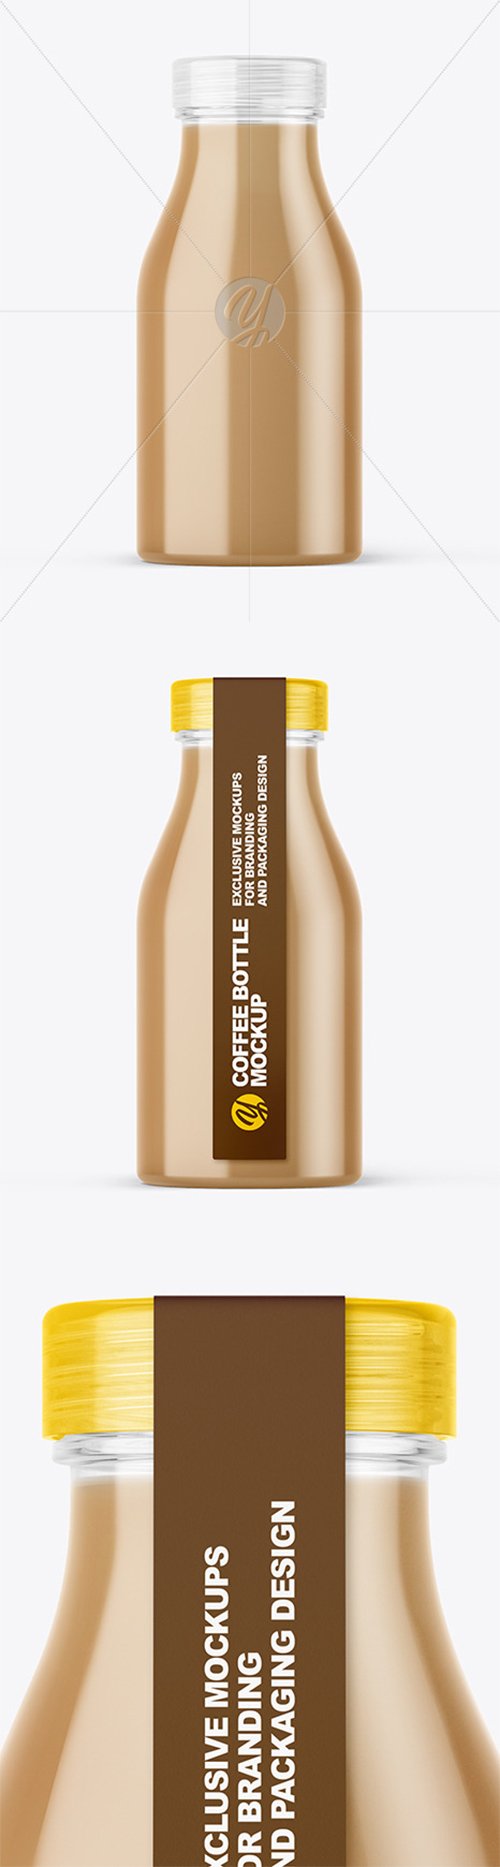 Coffee Bottle with a Tag Mockup 65352